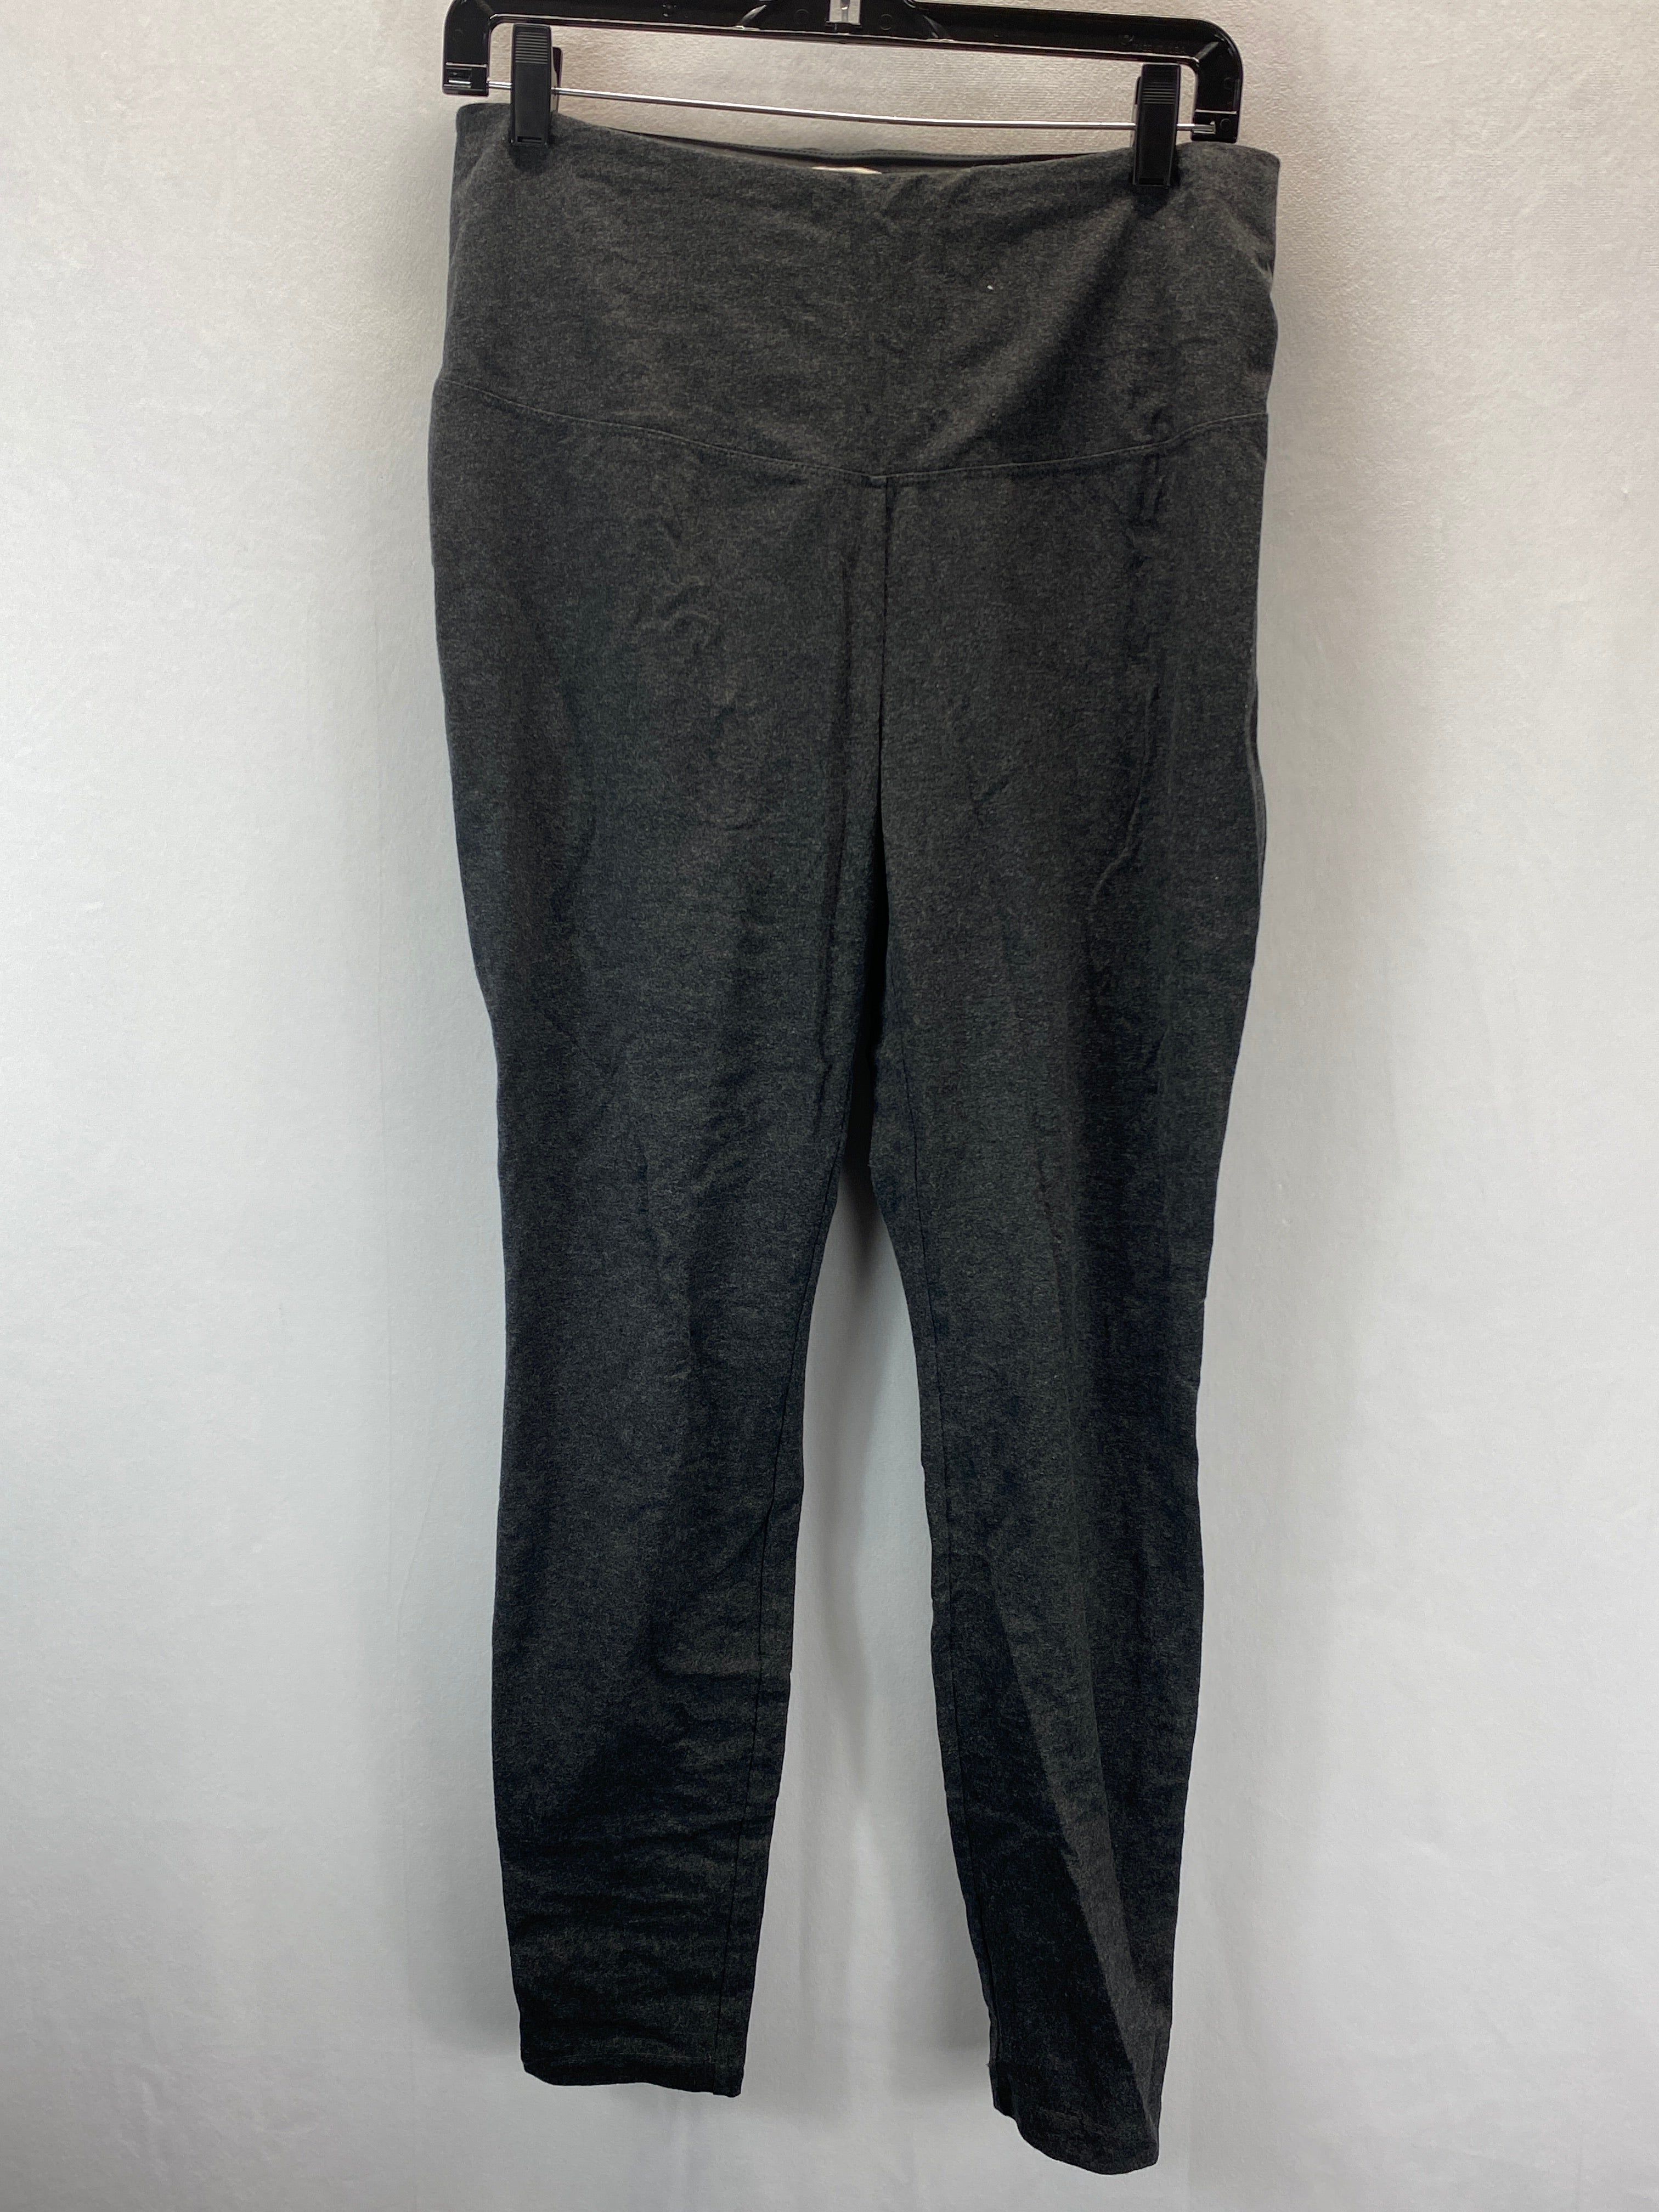 Pants Leggings By Zenergy By Chicos Size: Petite L